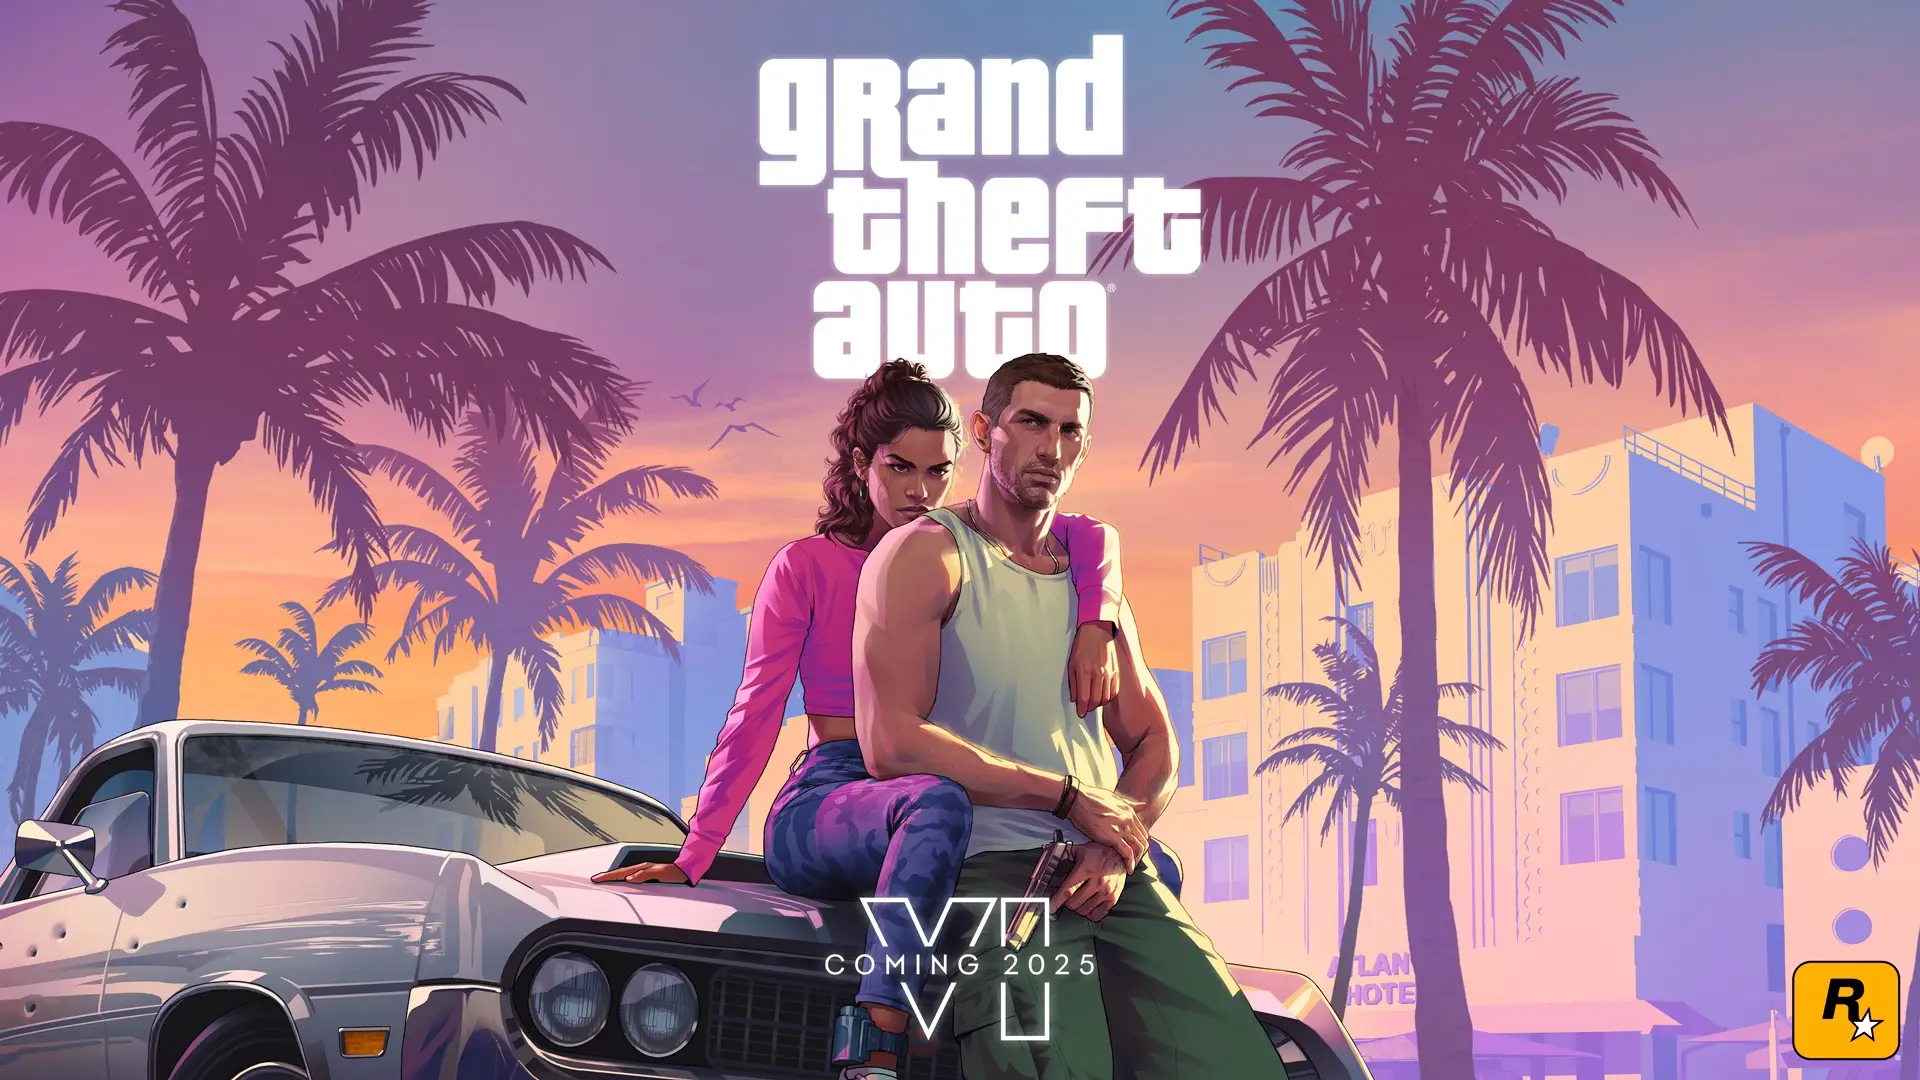 Grand Theft Auto VI Trailer with a 2025 Release Date